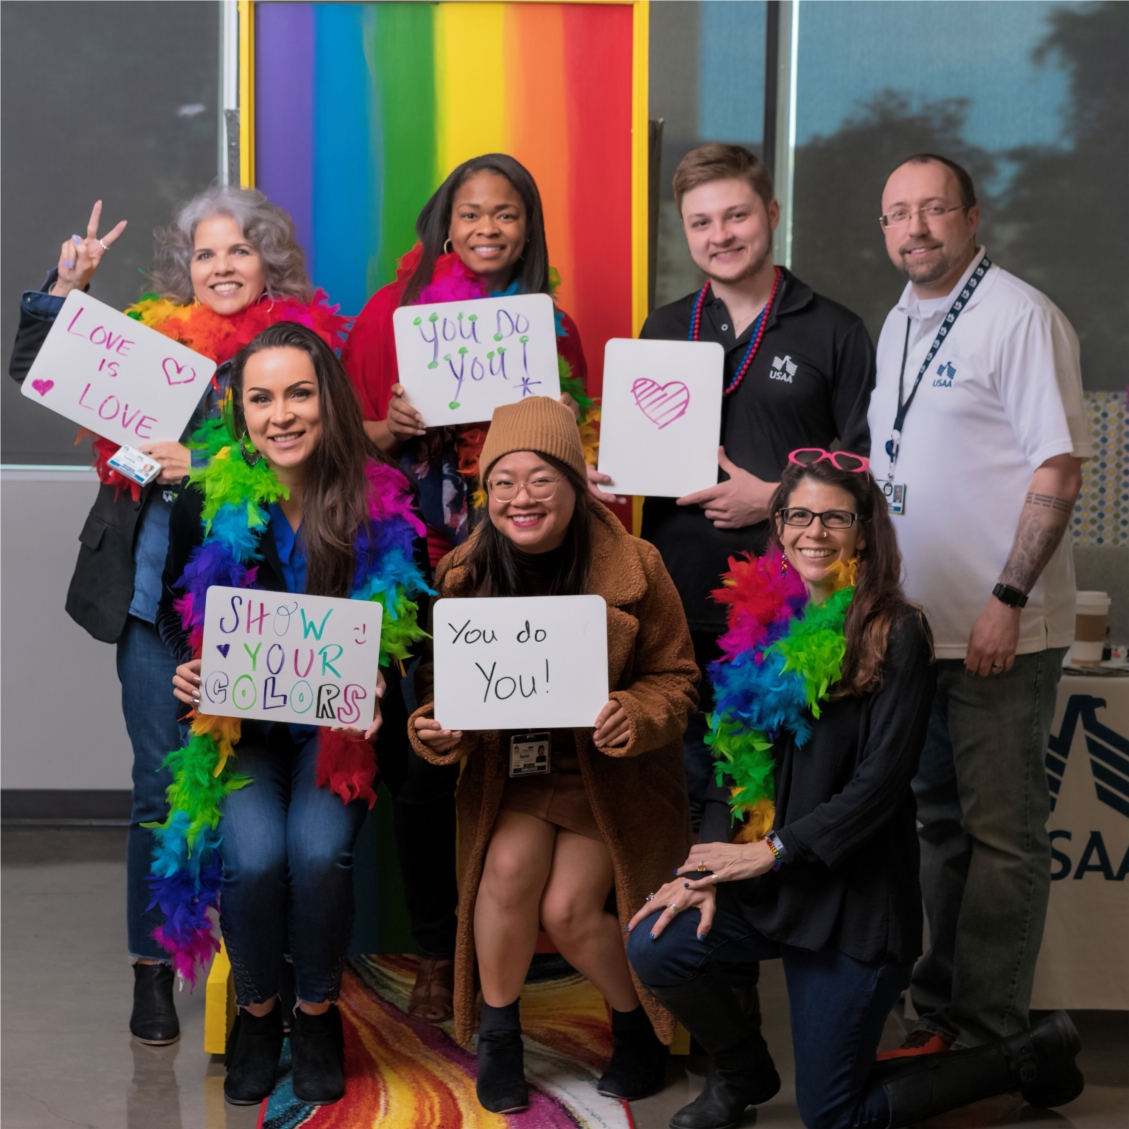 USAA offers many Diversity Business Groups, in this photo employees are celebrating National Coming Out Day